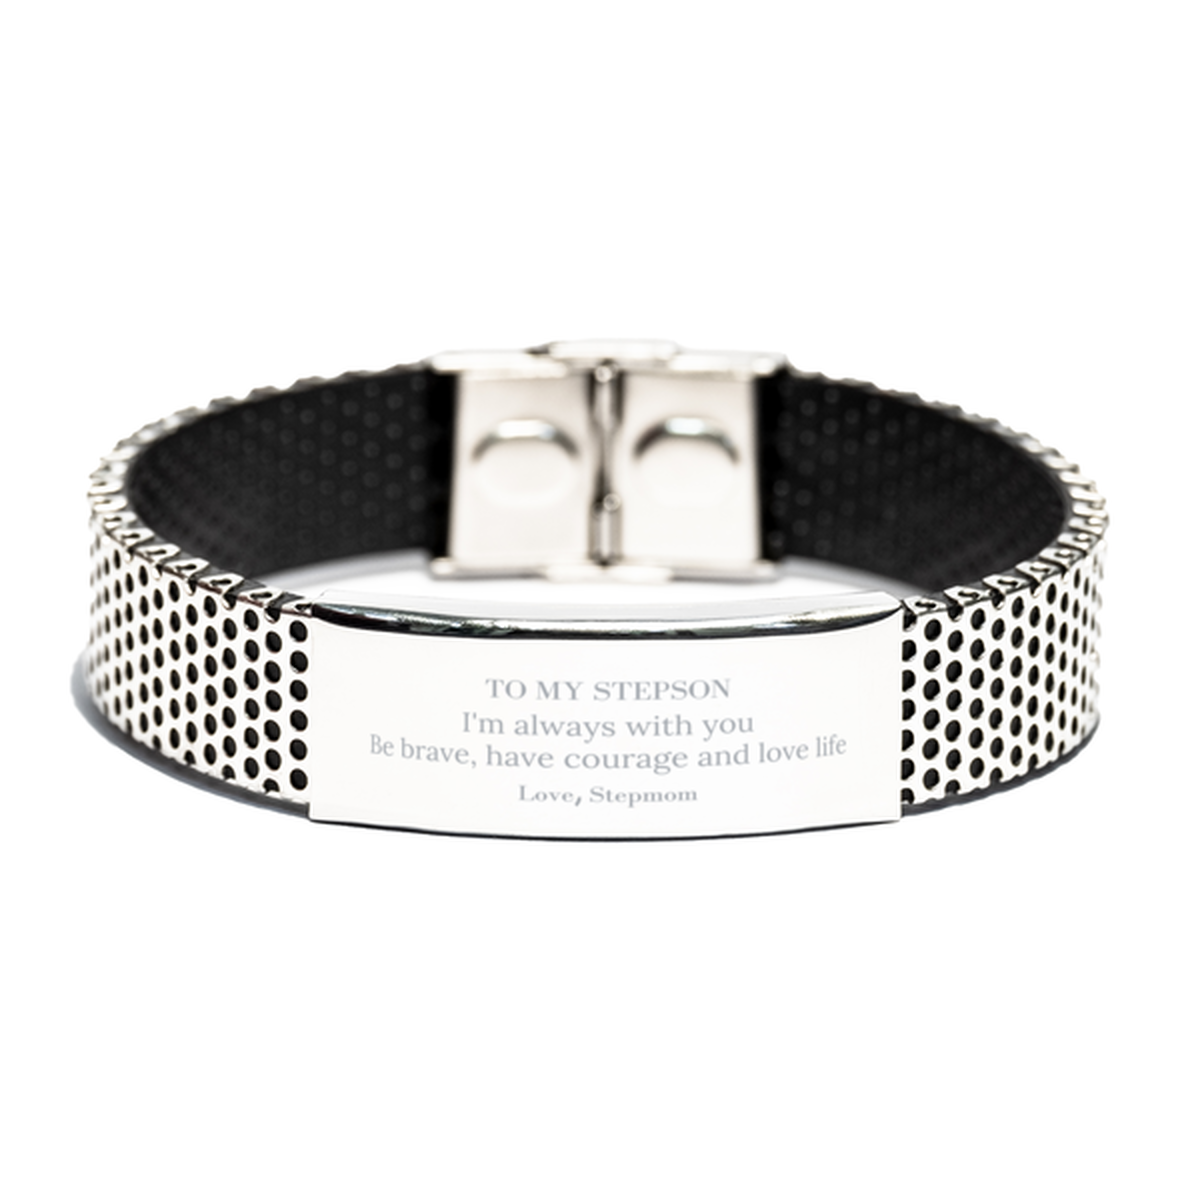 To My Stepson Gifts from Stepmom, Unique Stainless Steel Bracelet Inspirational Christmas Birthday Graduation Gifts for Stepson I'm always with you. Be brave, have courage and love life. Love, Stepmom